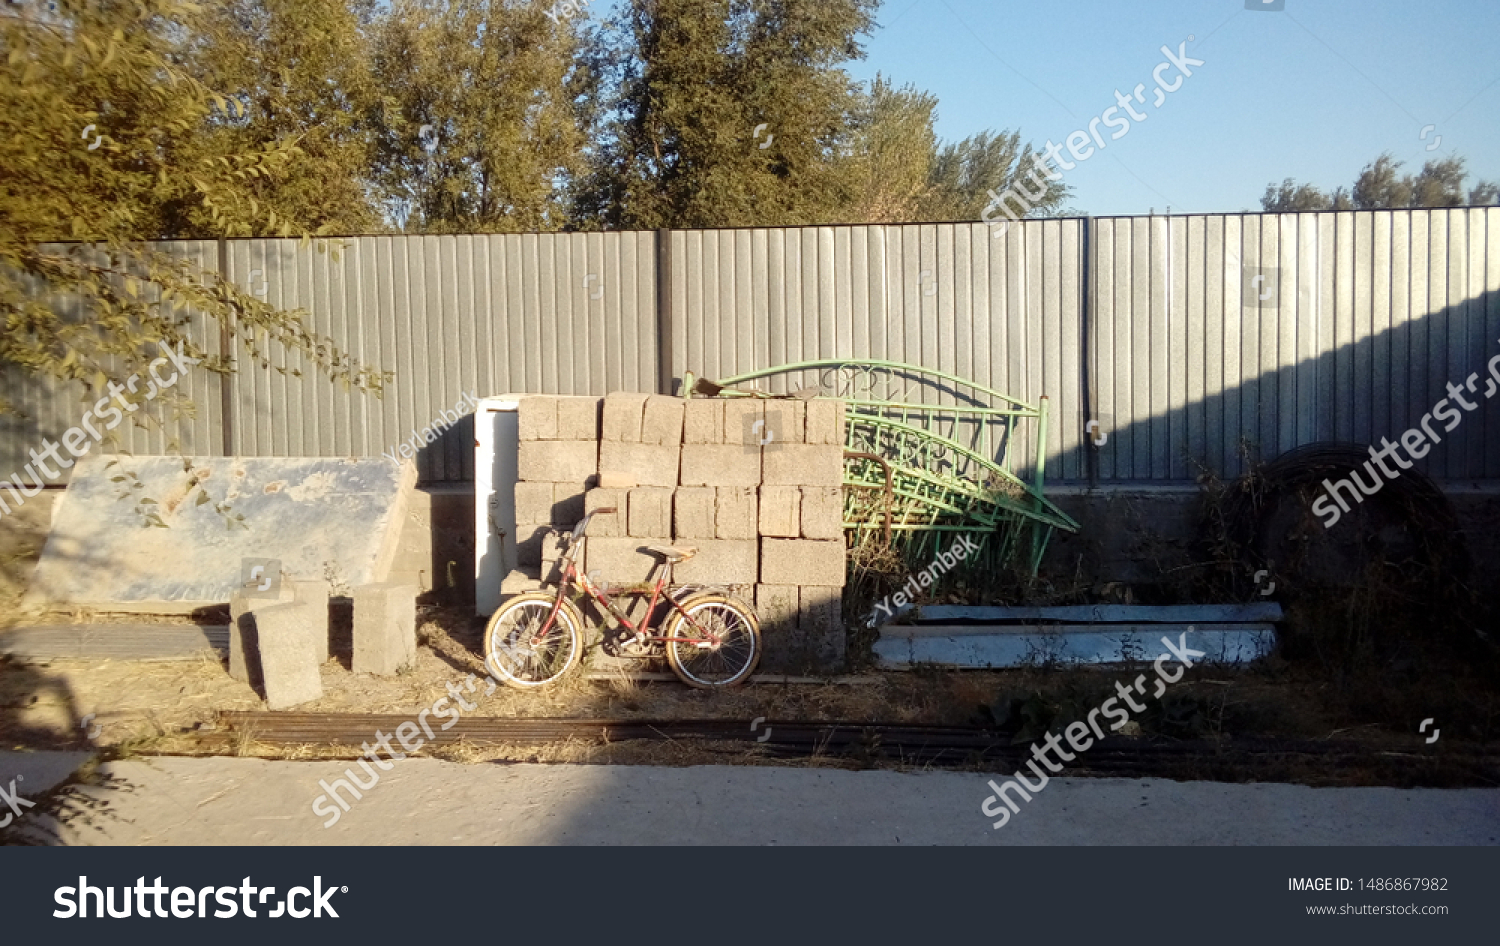 A typical aul yard from the inside. At the fence of corrugated board, a bicycle and miscellaneous utensils #1486867982